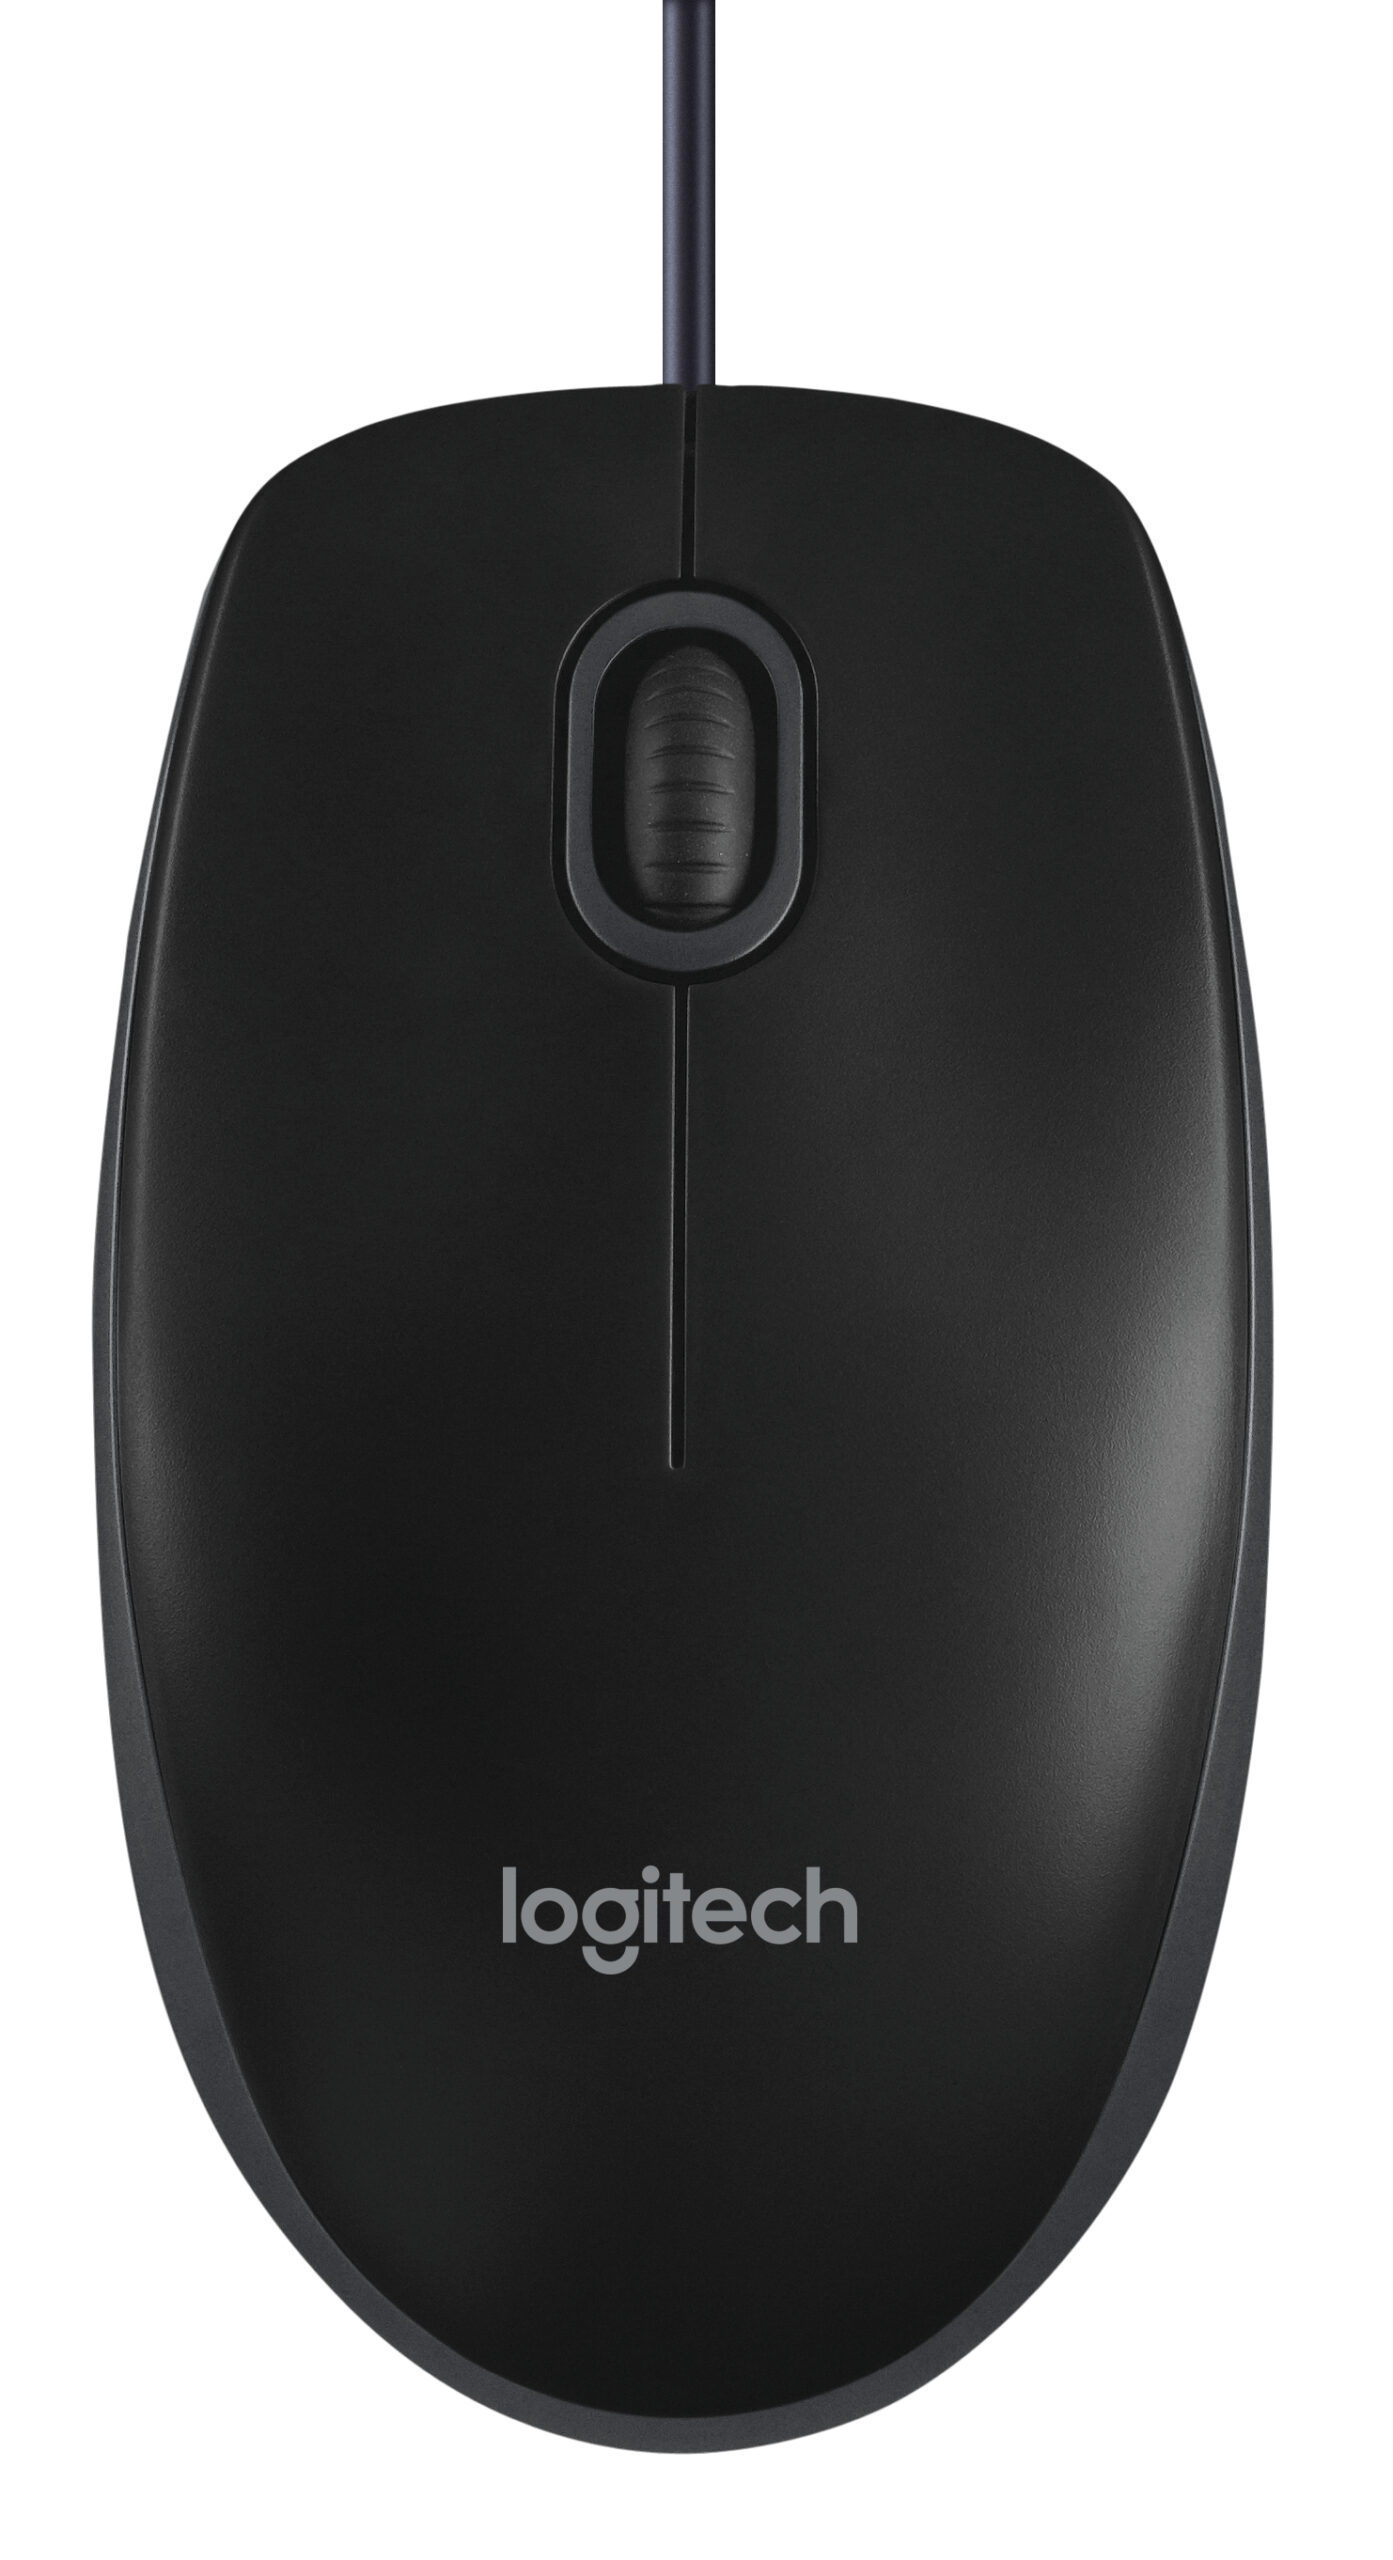 B100 Optical Mouse For Business Logitech Input Devices 910 003357 5099206041271